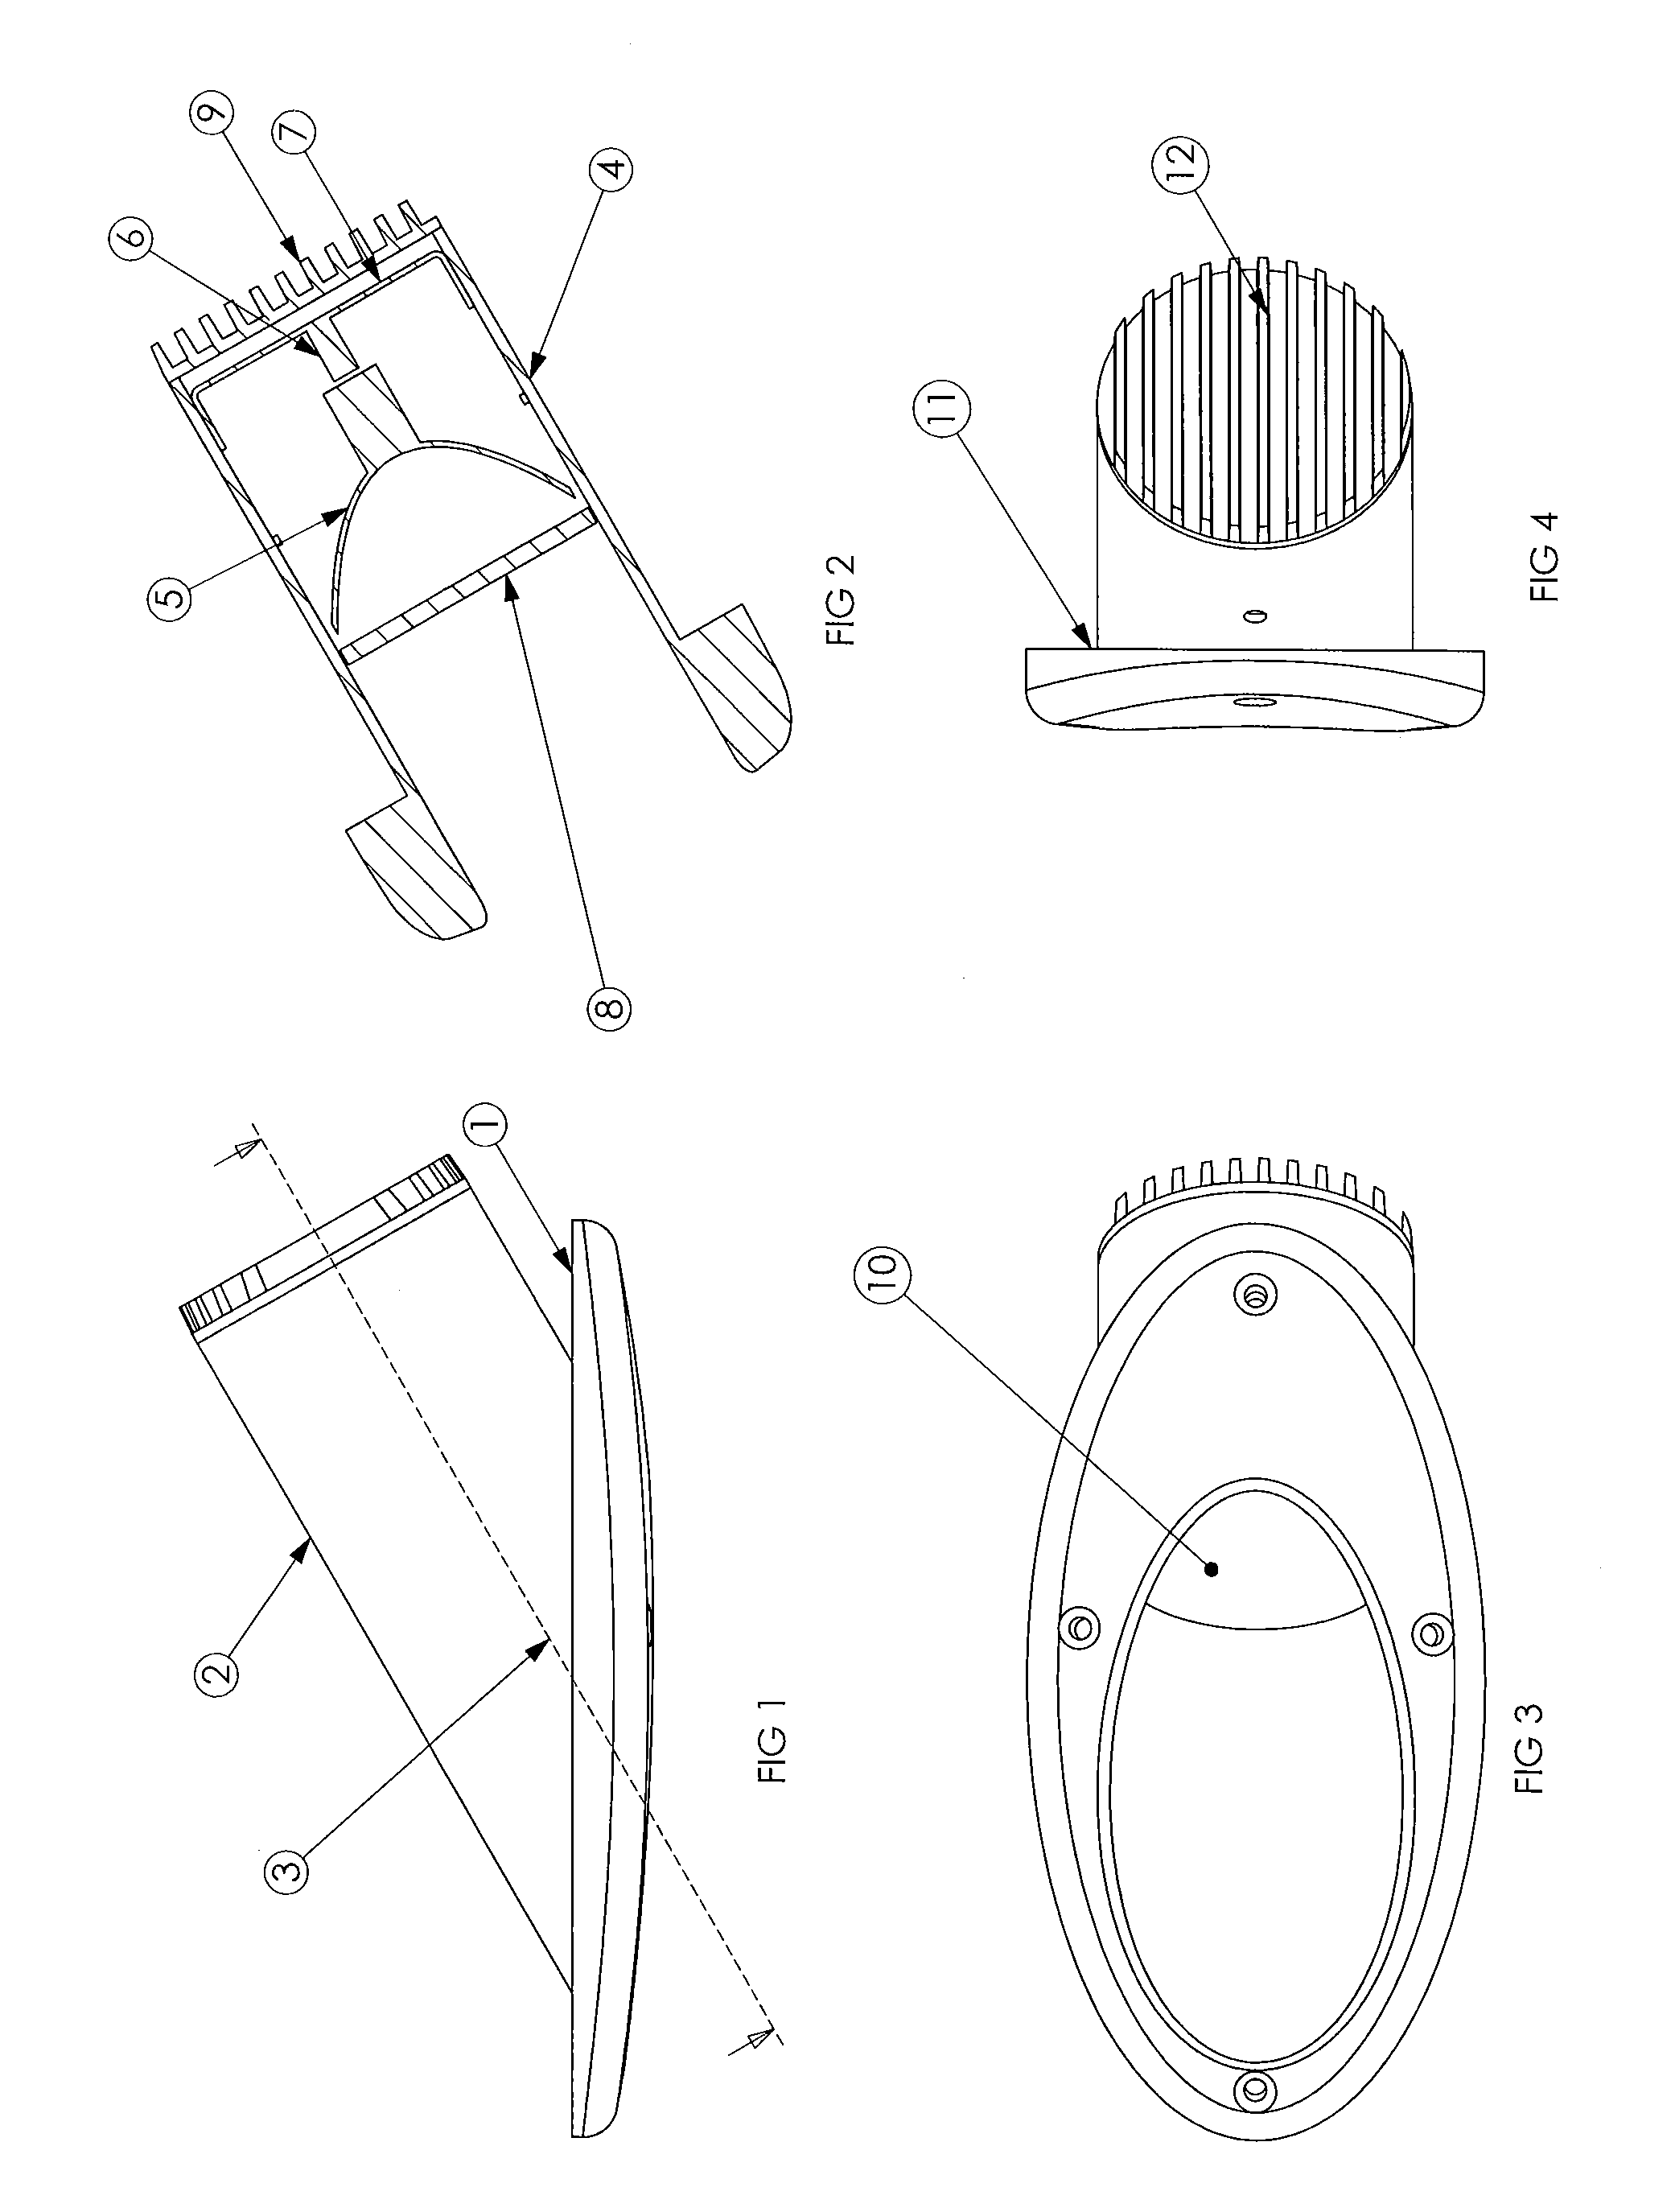 Method and apparatus for creating a high efficiency surface mount illumination device for projecting electromagnetic radiation at a high angle from the surface normal